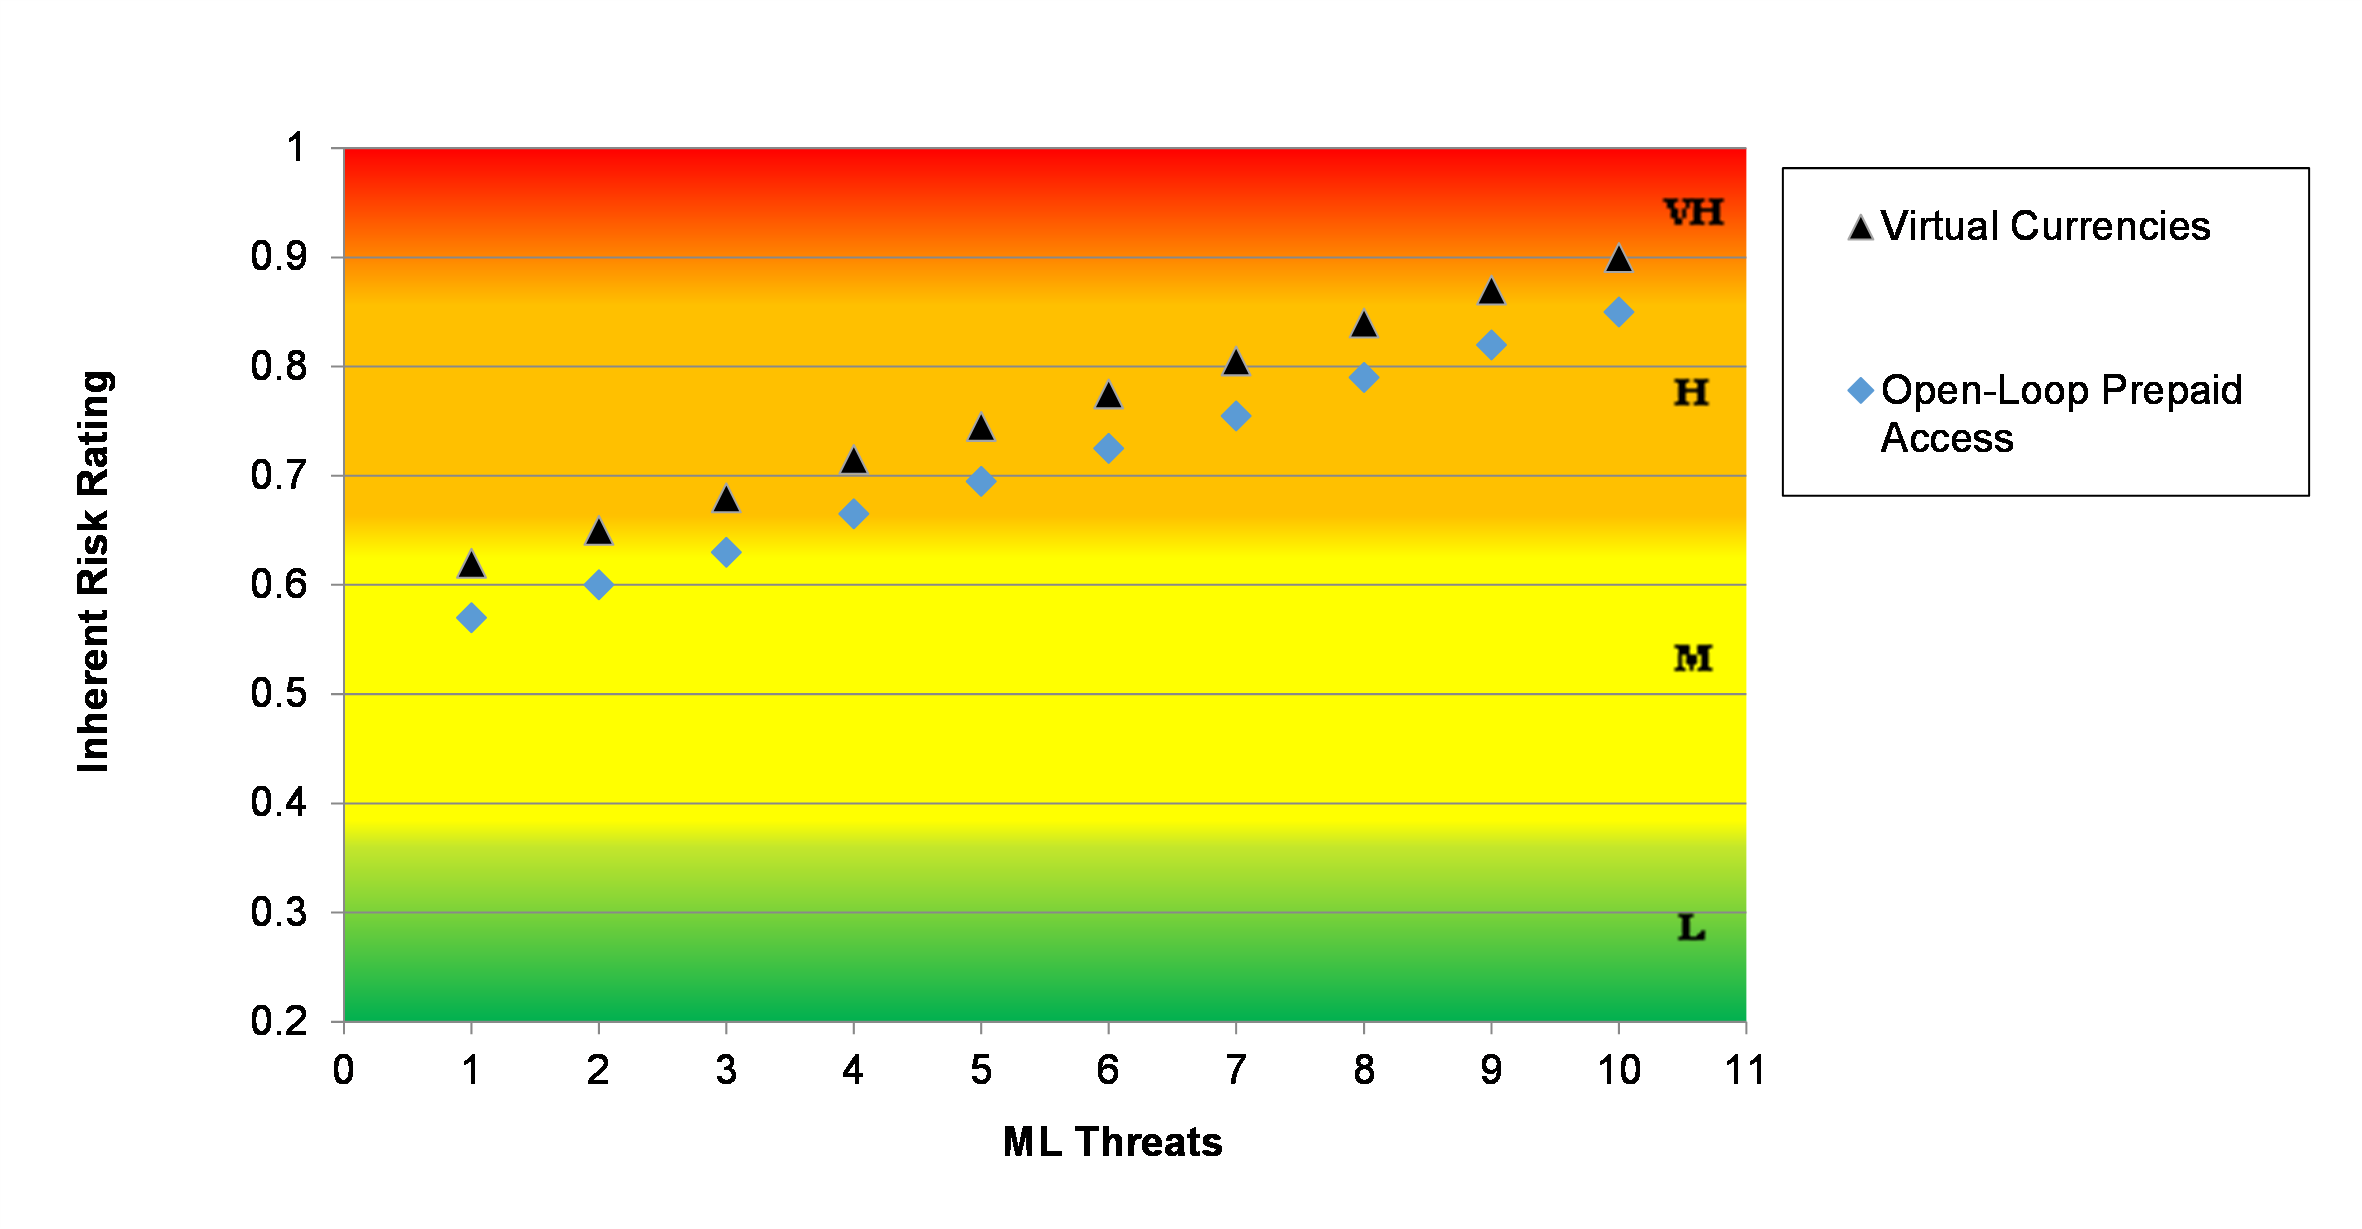 Figure 7: Inherent ML Risks related to Products Holding Monetary Value by Type of ML Threats